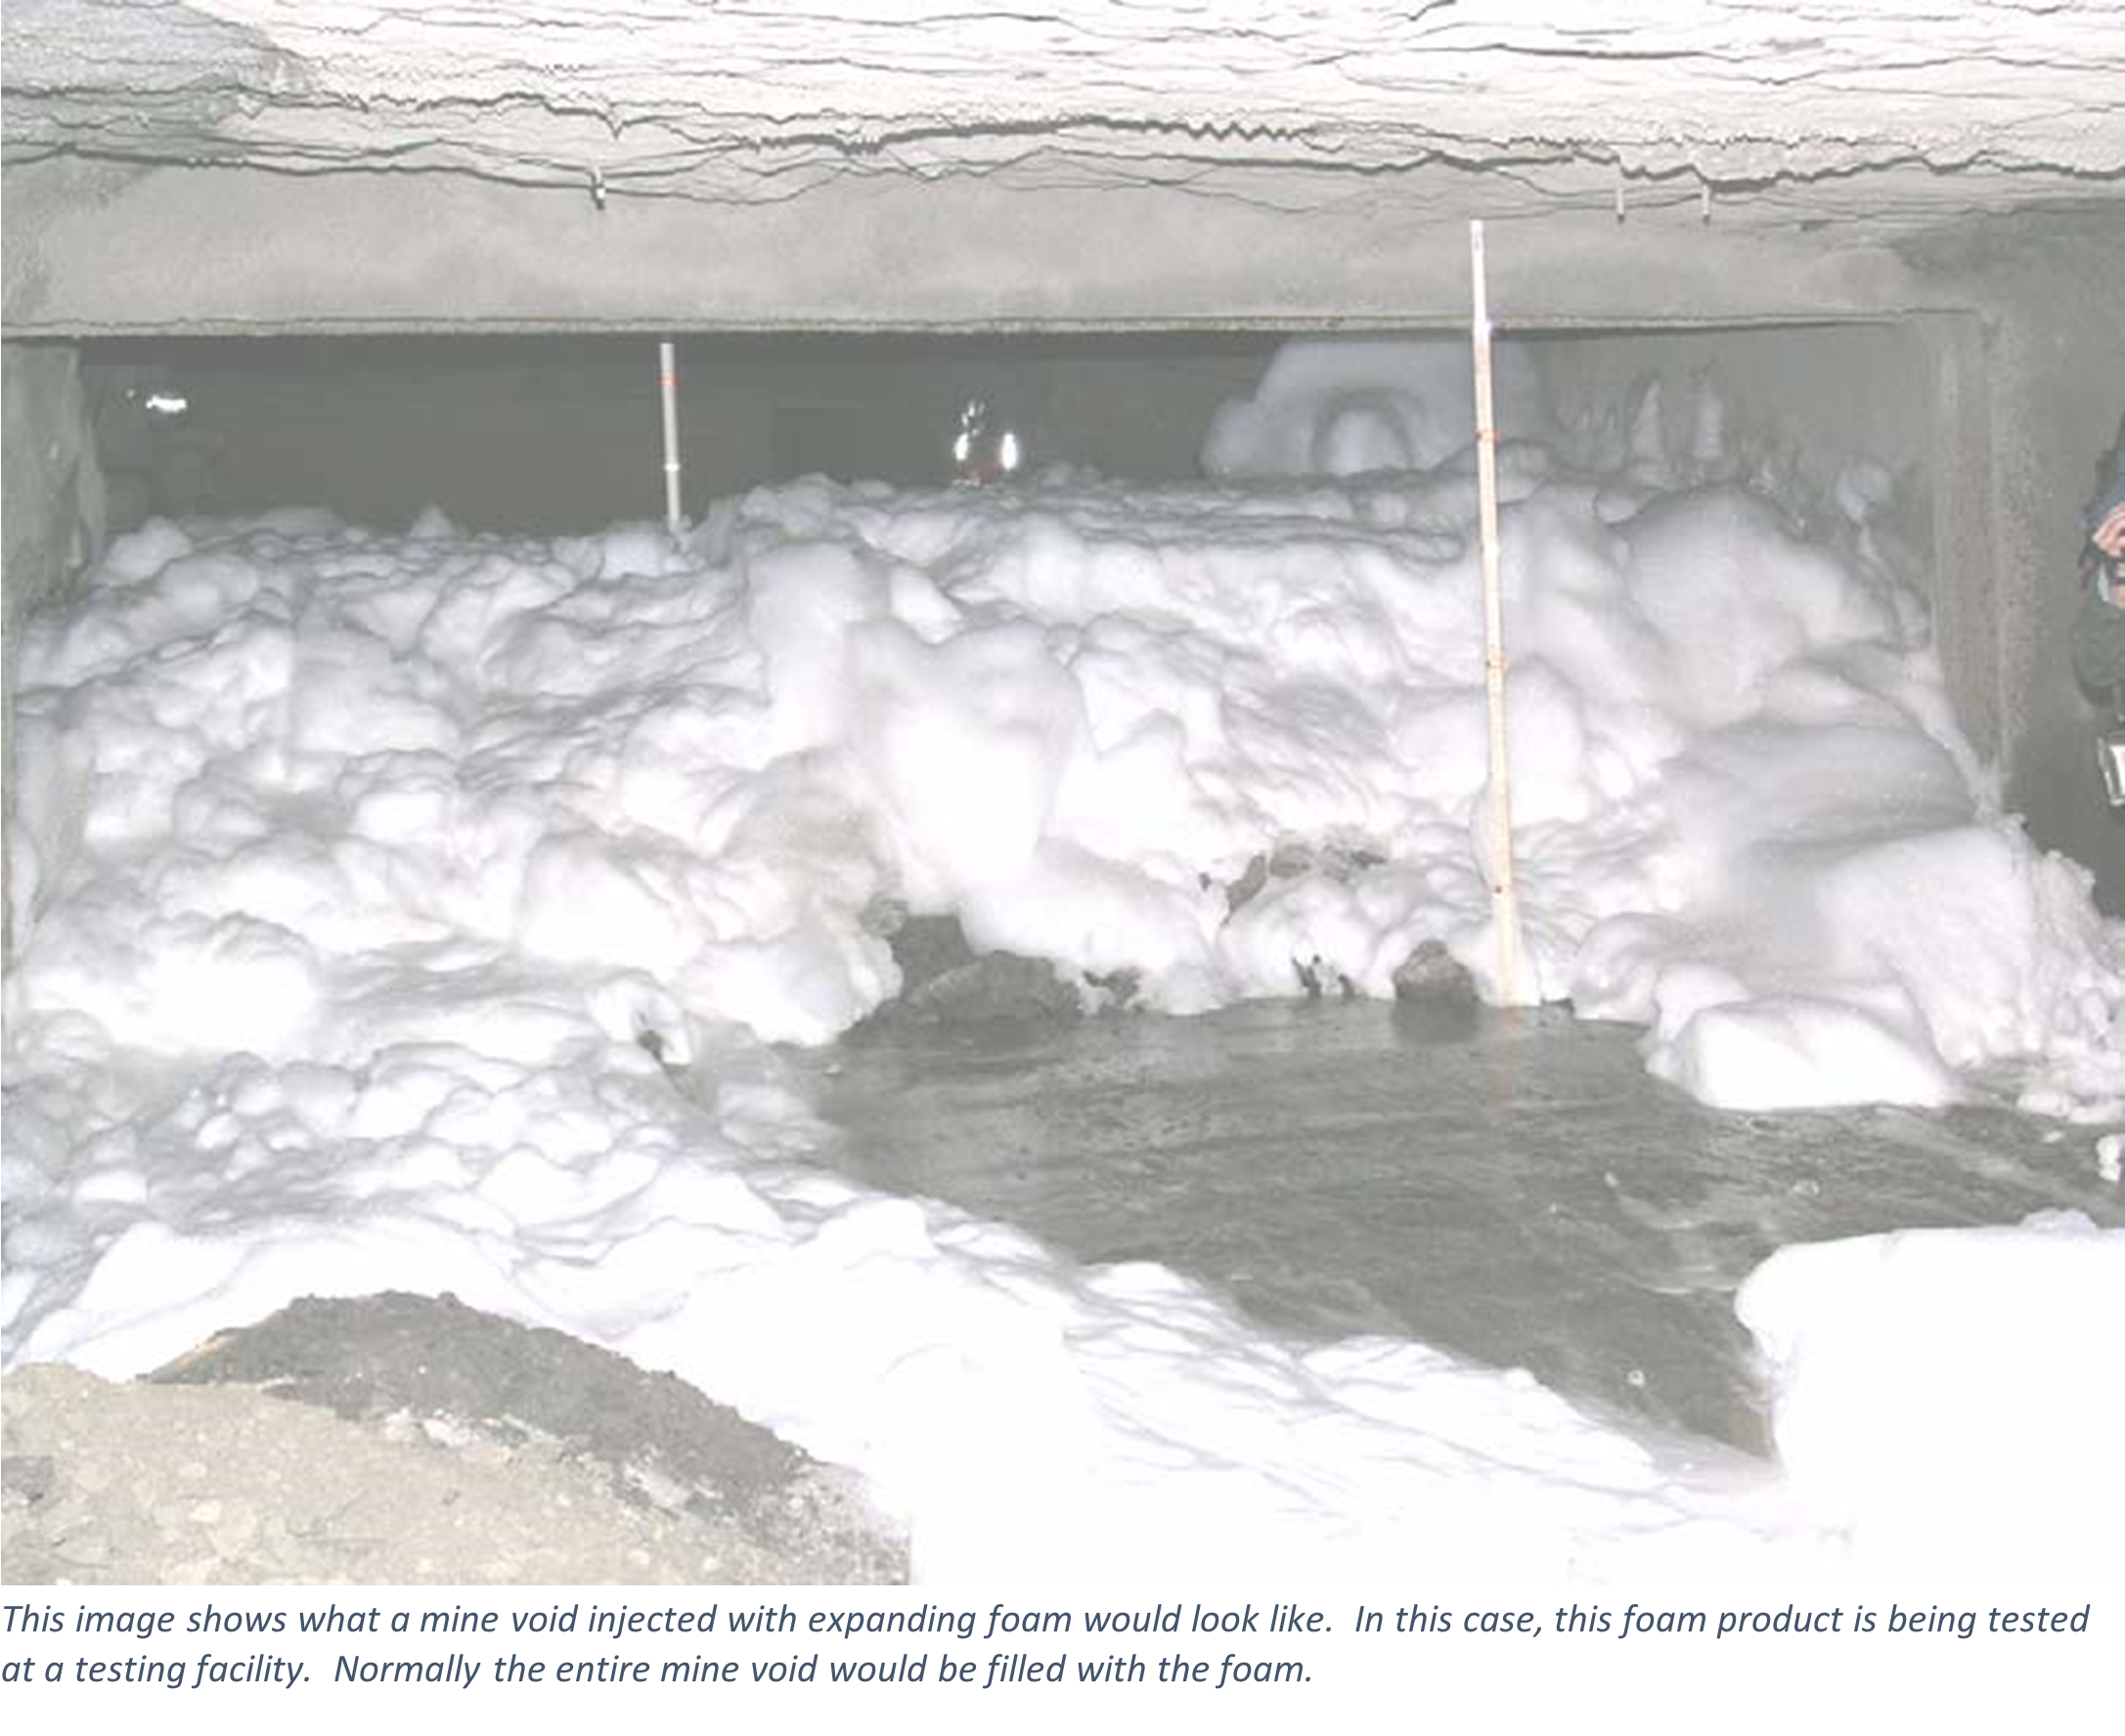 This image shows what a mine void injected with expanding foam would look like.  In this case, this foam product is being tested at a testing facility.  Normally the entire mine void would be filled with the foam.